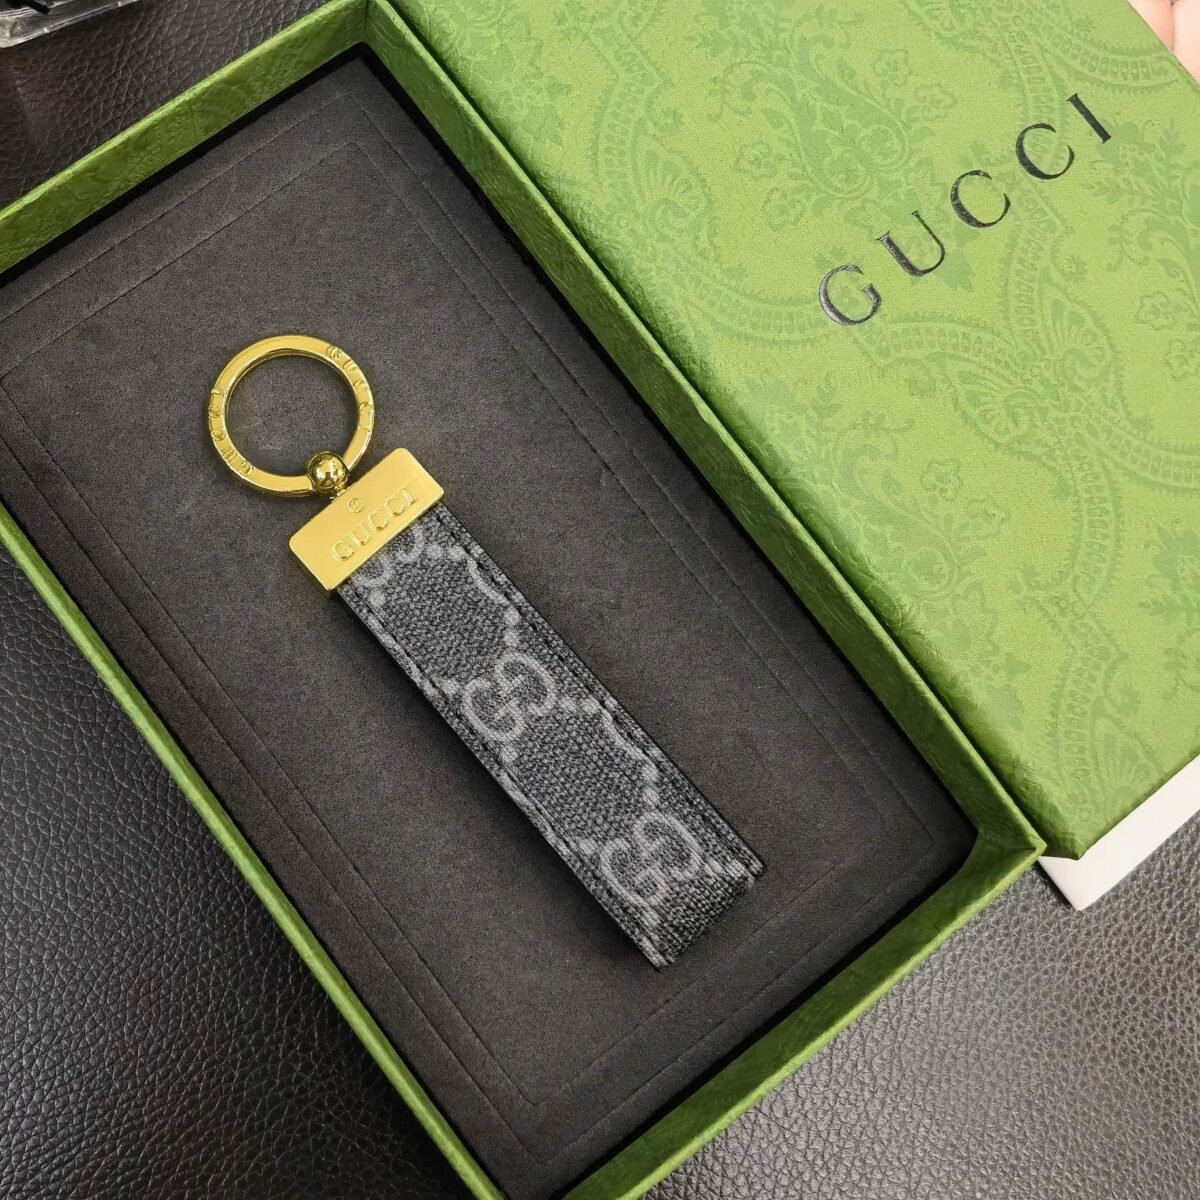 High-end Gucci key chains - a blend of fashion and functionality in exquisite craftsmanship.